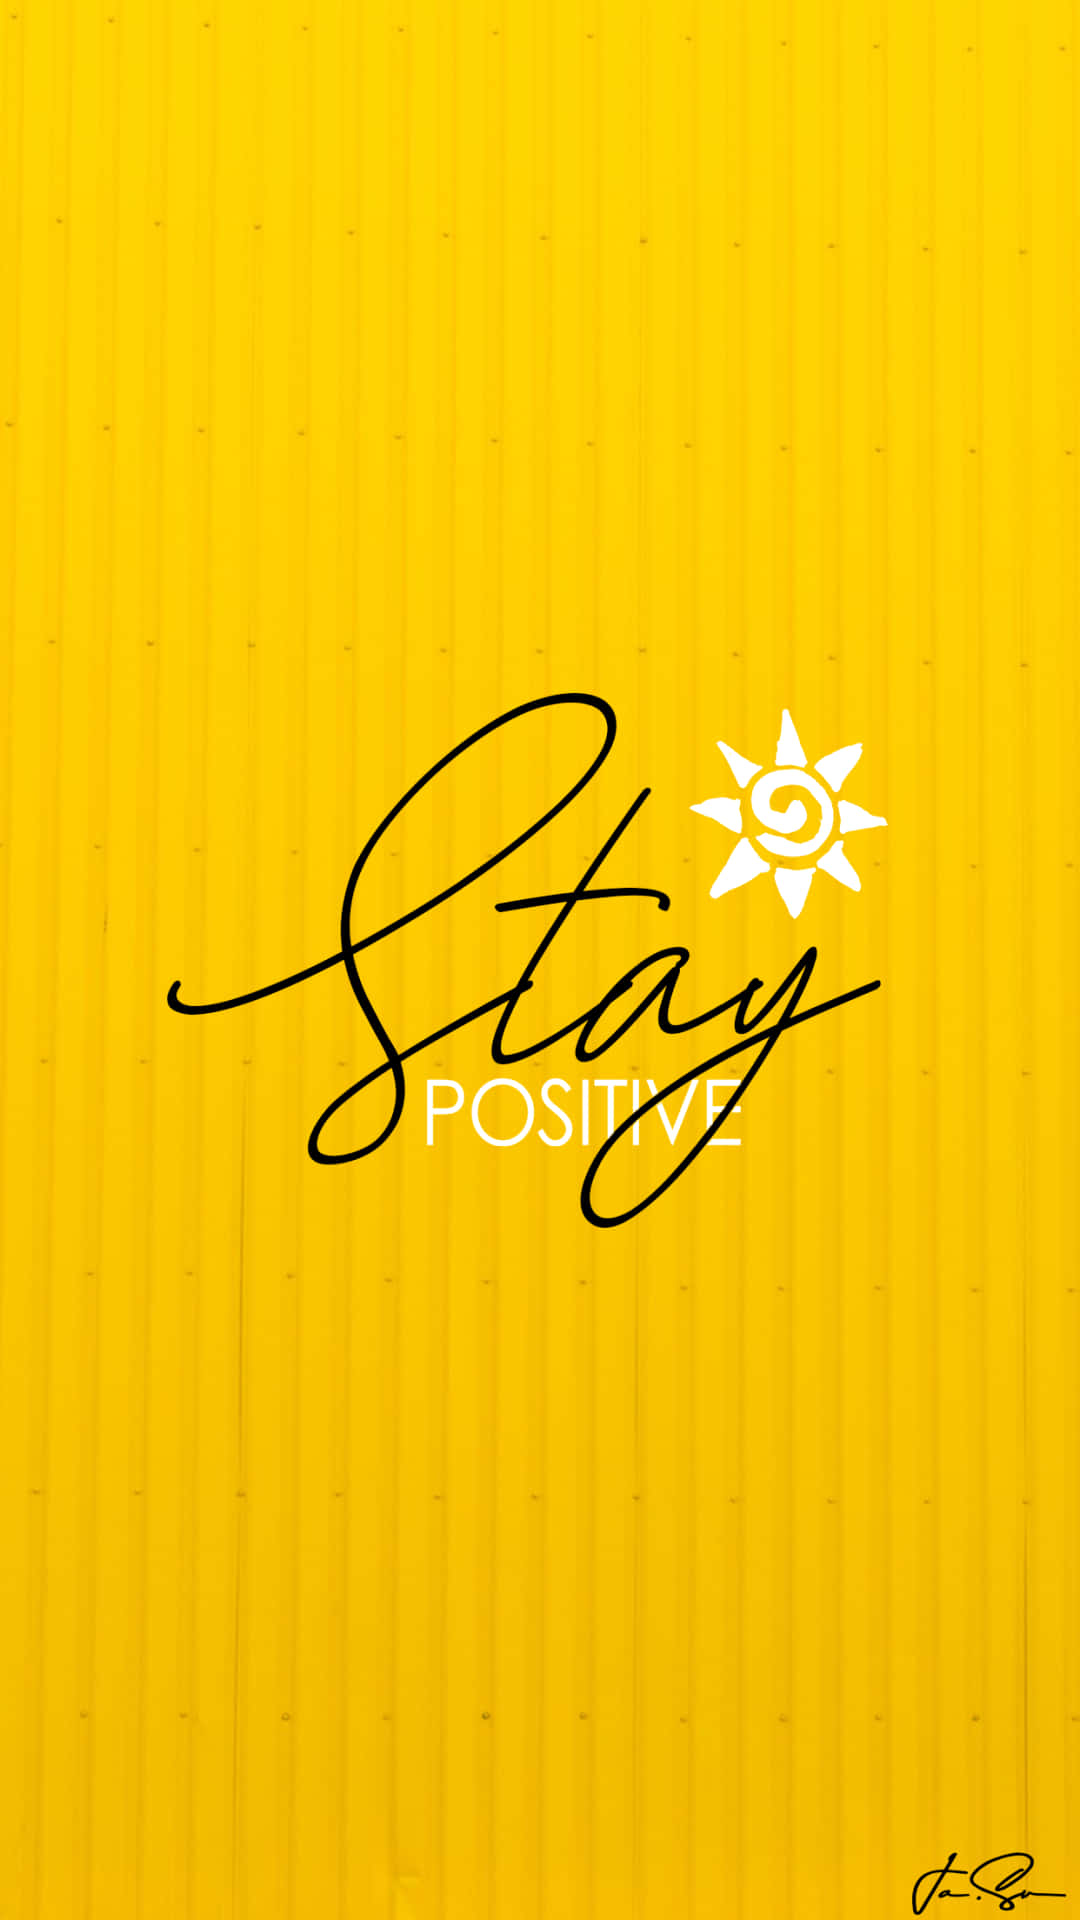 Download wallpapers Stay Positive 3D sun positive quotes 3D art Stay  Positive concepts creative art quotes about Stay Positive motivation  quotes for desktop with resolution 3840x2400 High Quality HD pictures  wallpapers